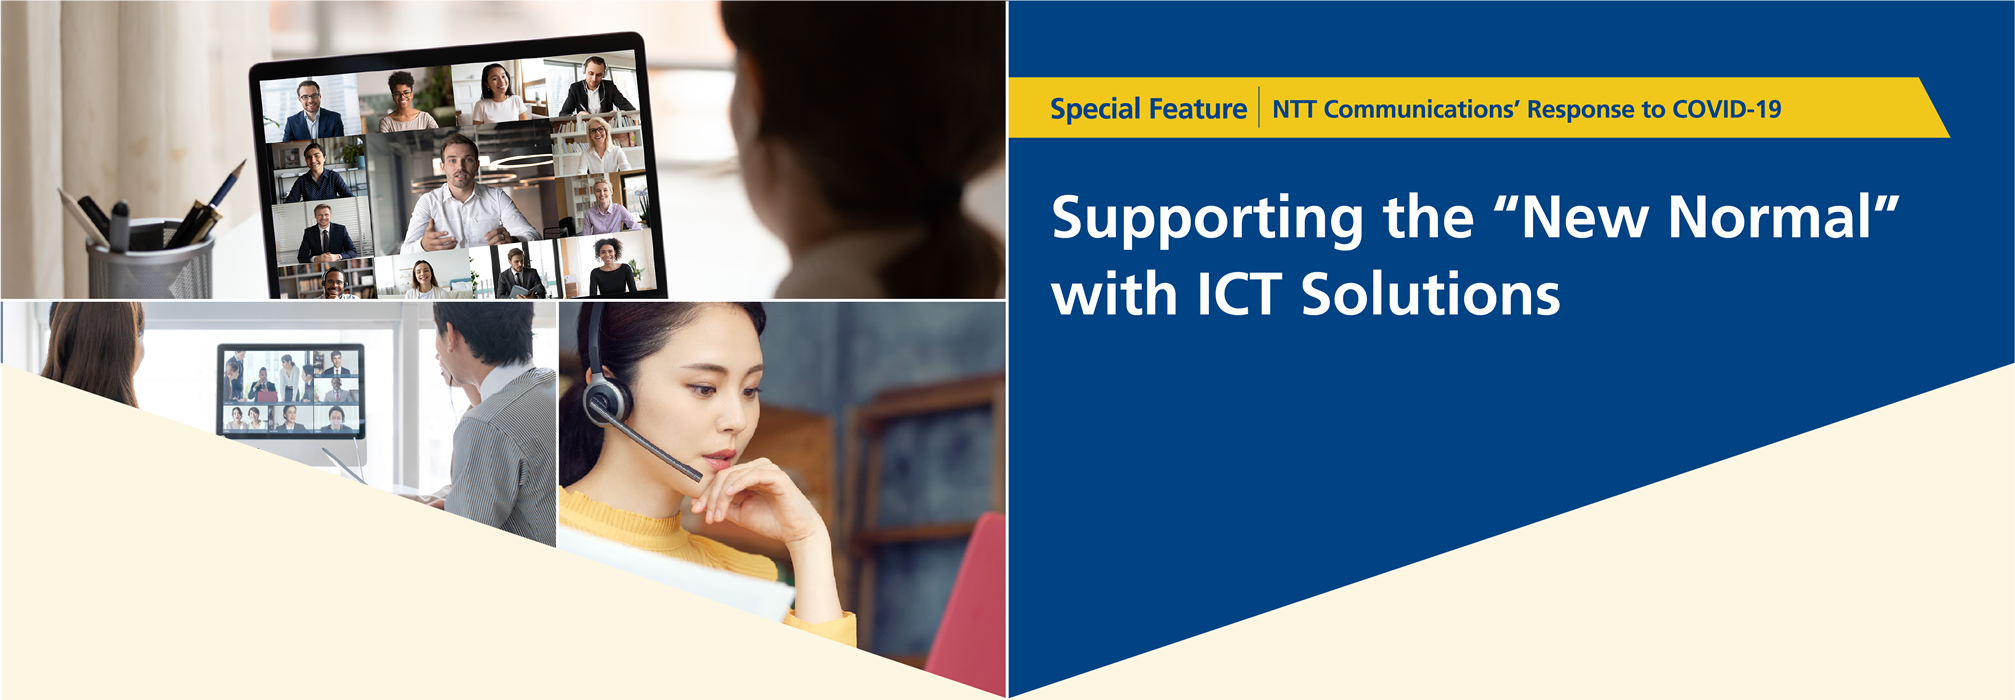 Supporting the “New Normal”with ICT Solutions